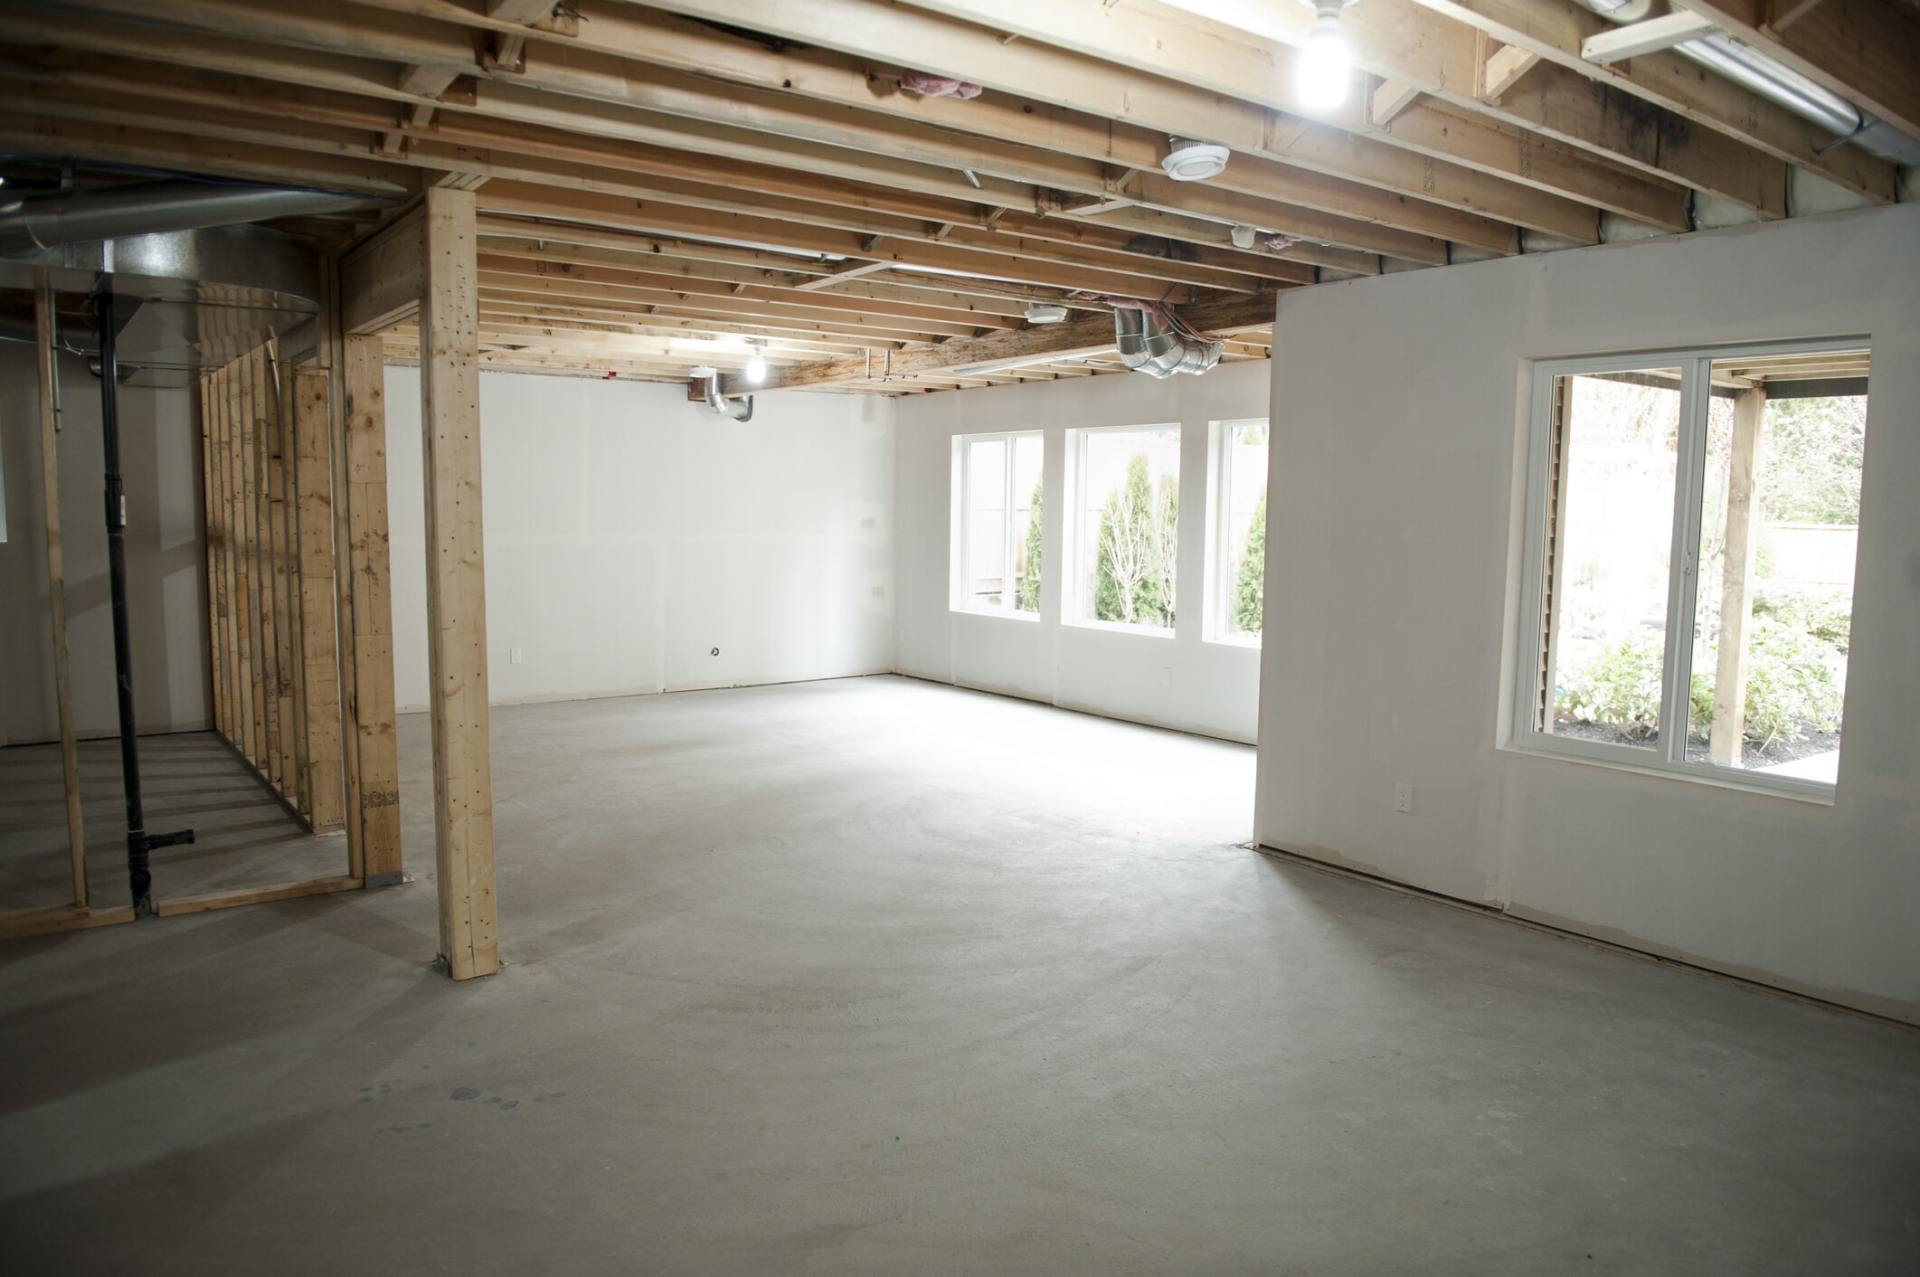 Basement Construction - Residential Remodeling Contractors in Channahon, IL